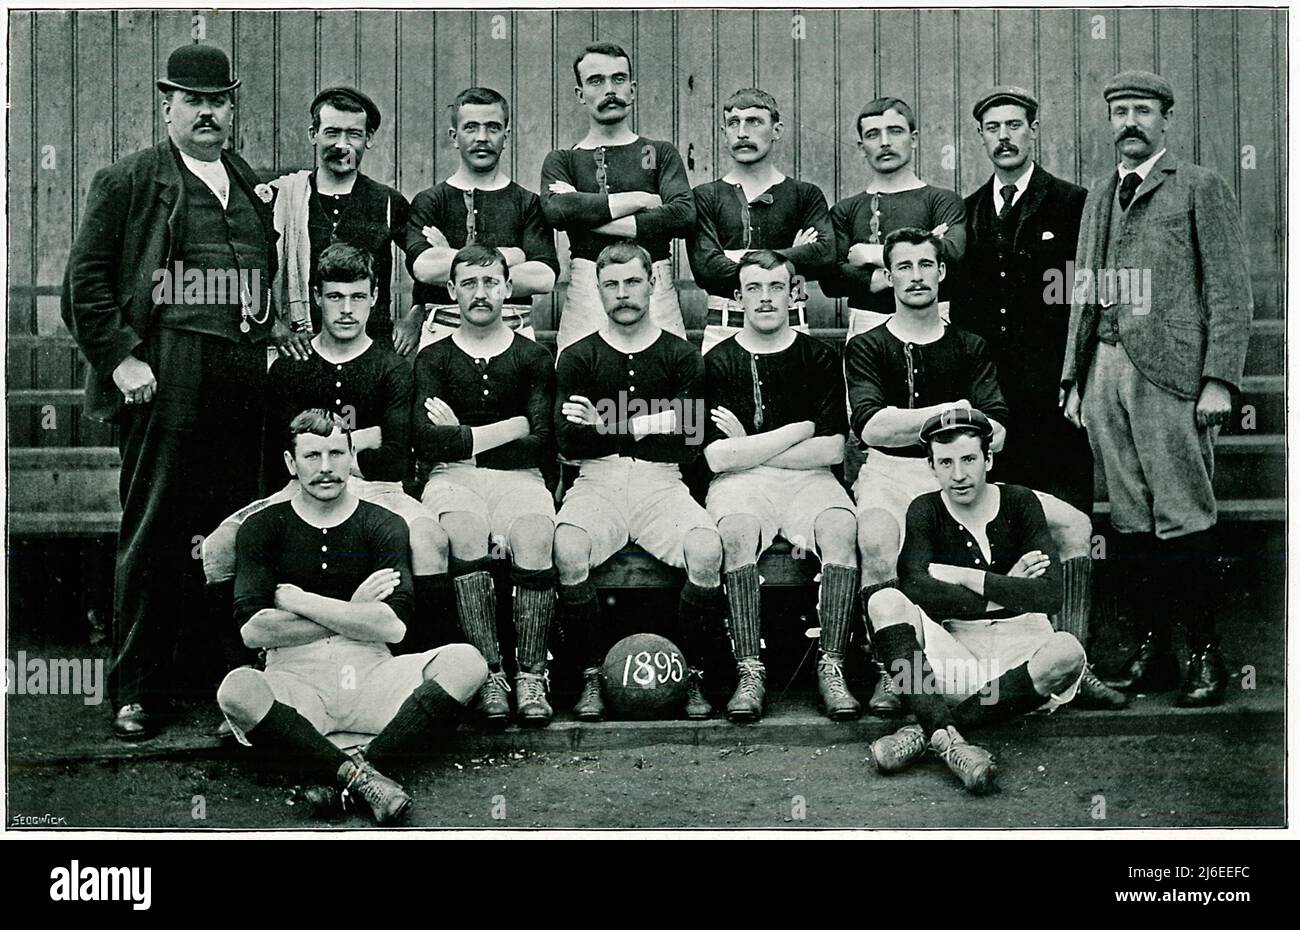 SPSC1151, Millwall Athletic, 1895 team photograph of the East London football club founded in 1885 as Millwall Rovers Stock Photo